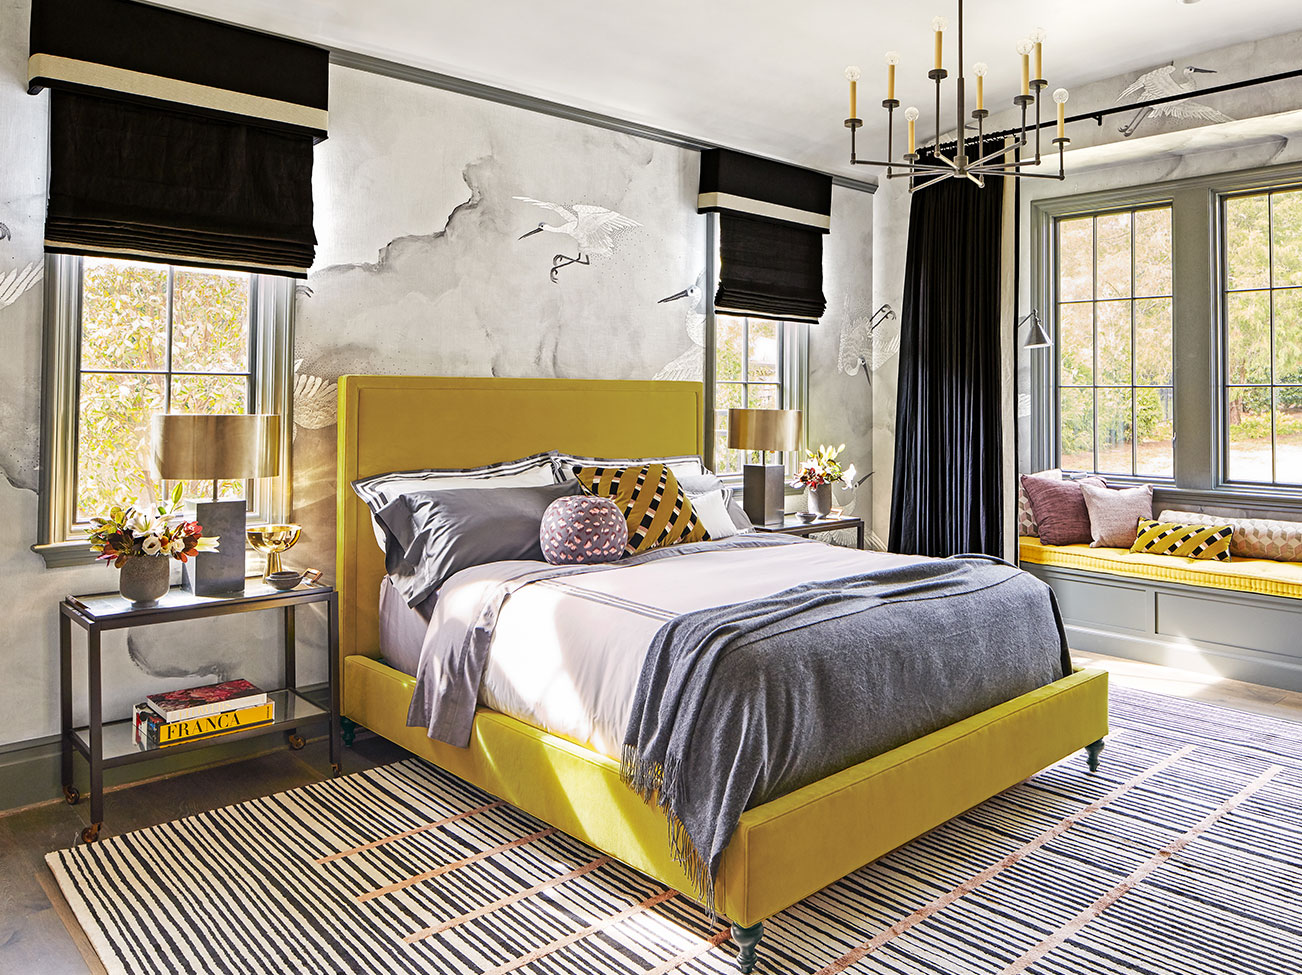 Bedroom with cloud mural, black window treatments, striped area rug, mustard yellow upholstered bed and window seat.